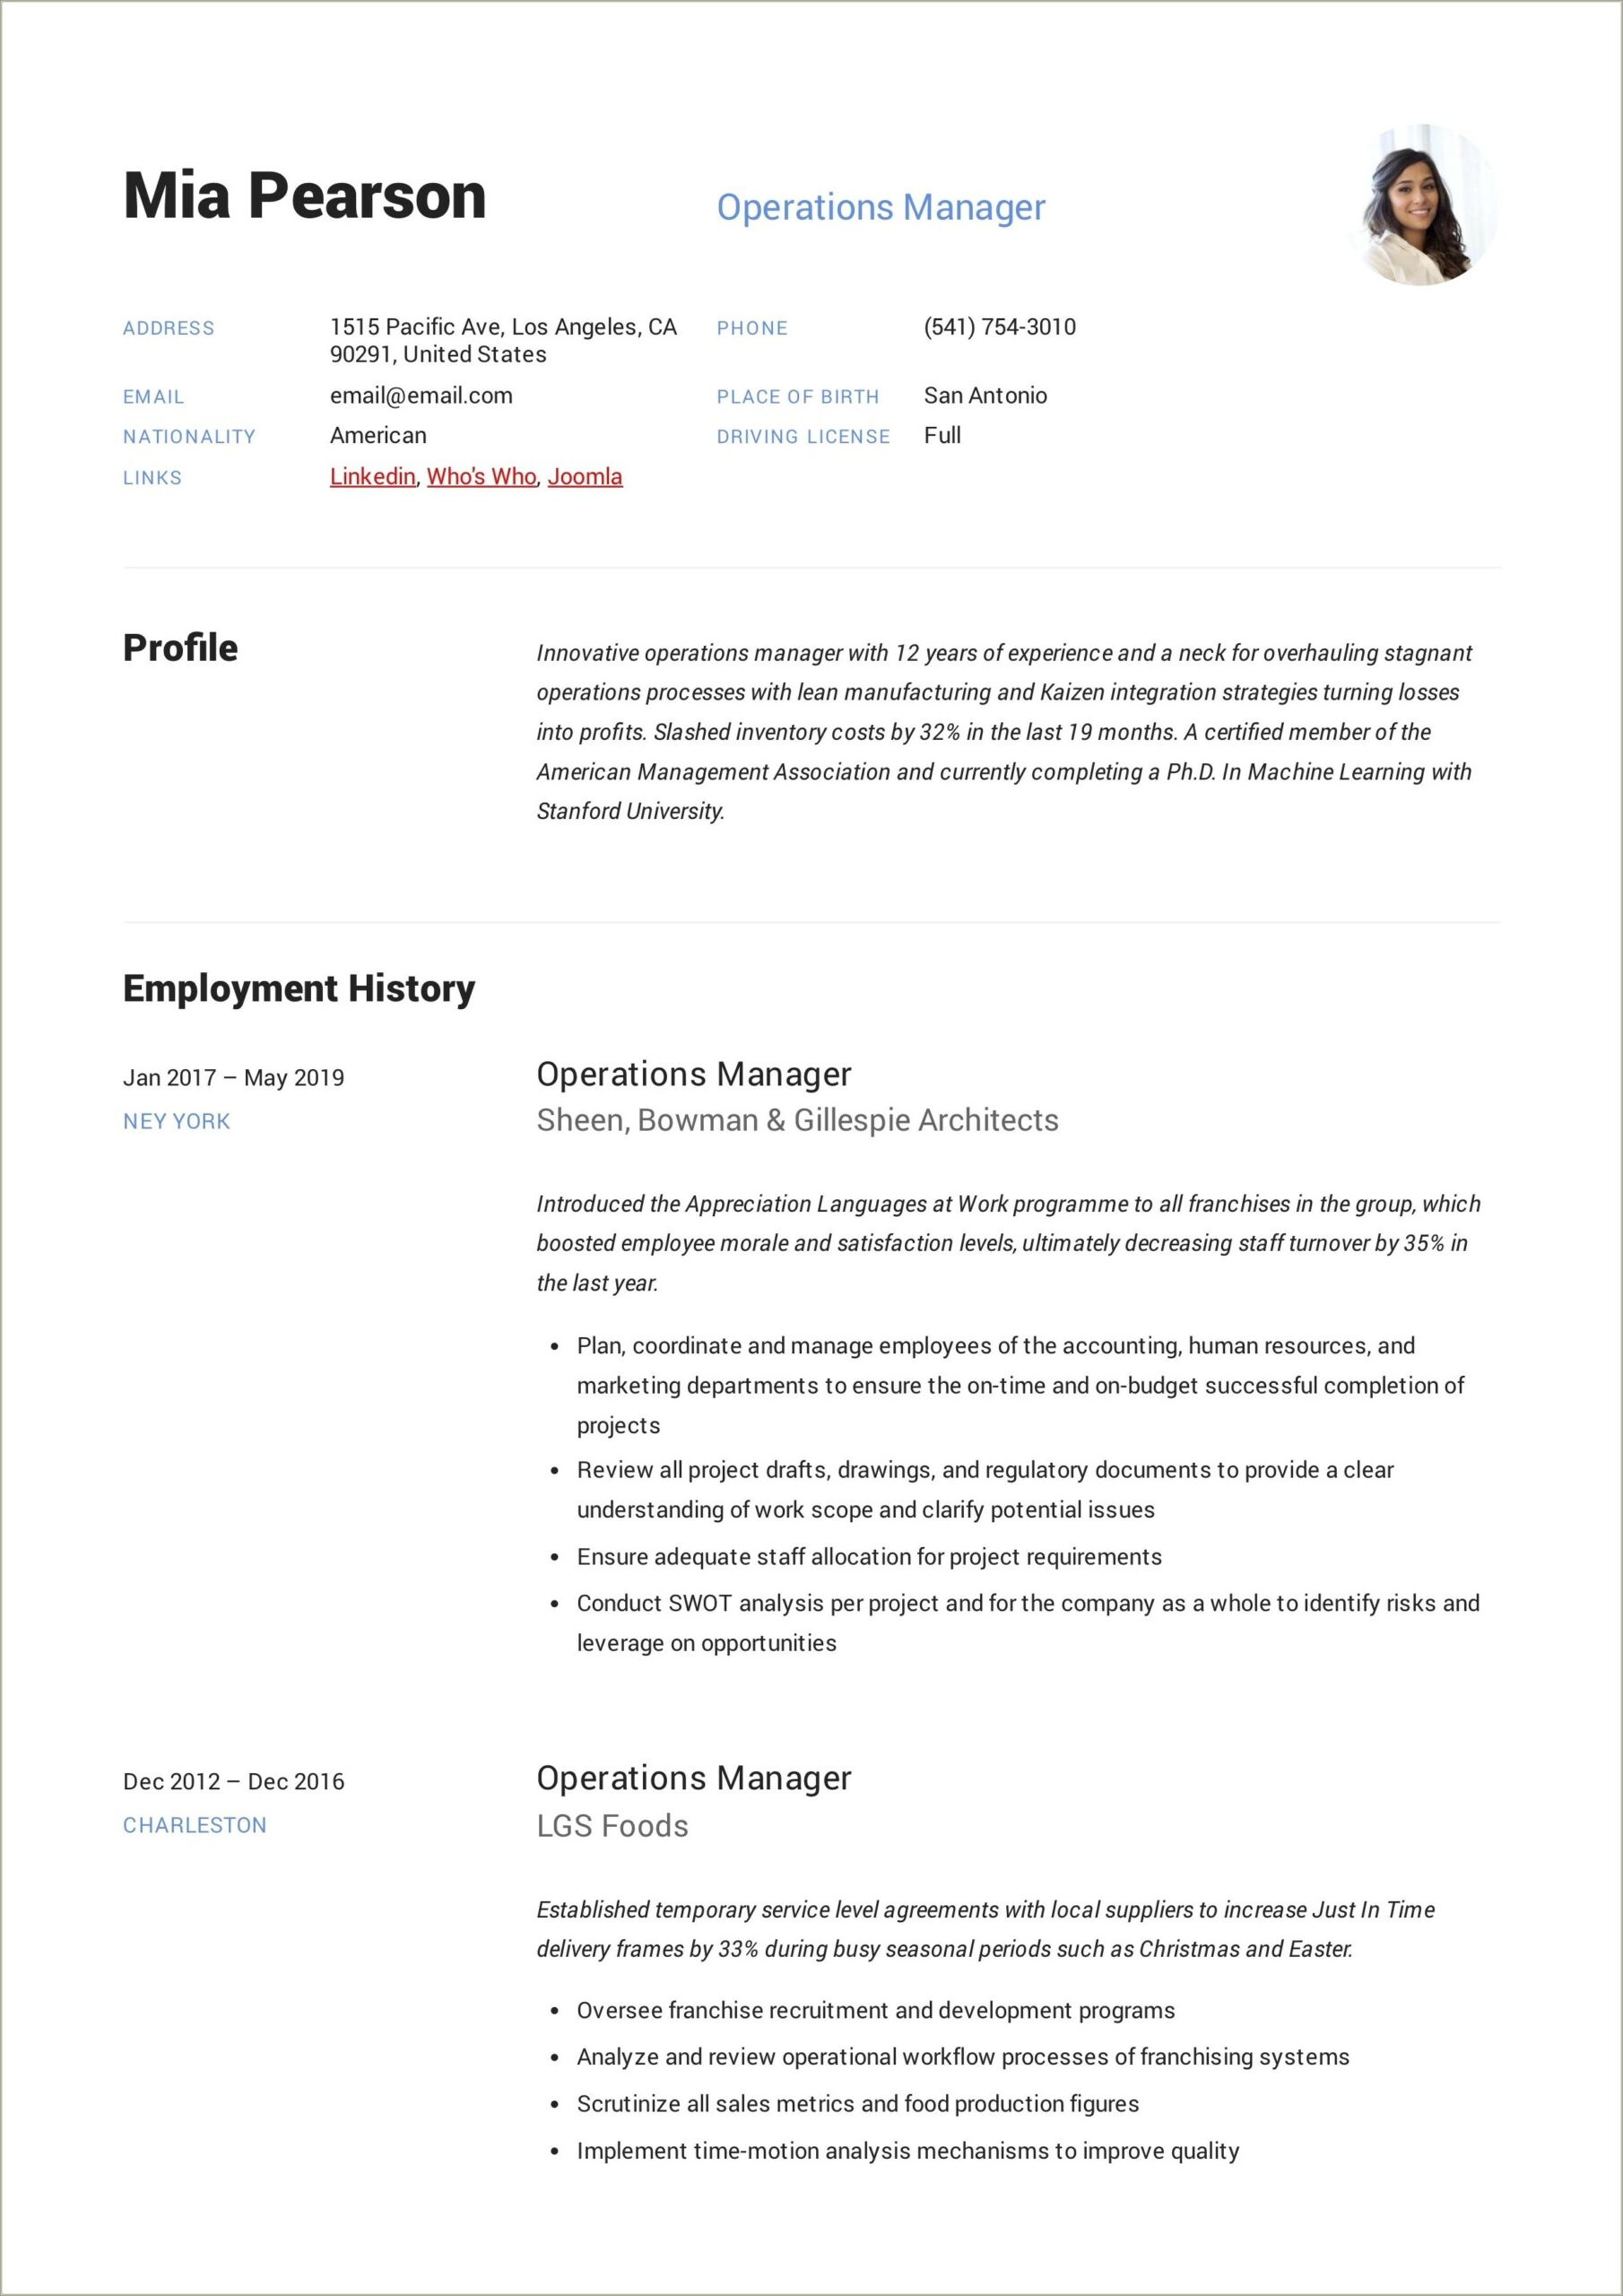 Hybrid Resume Example For Property Manager